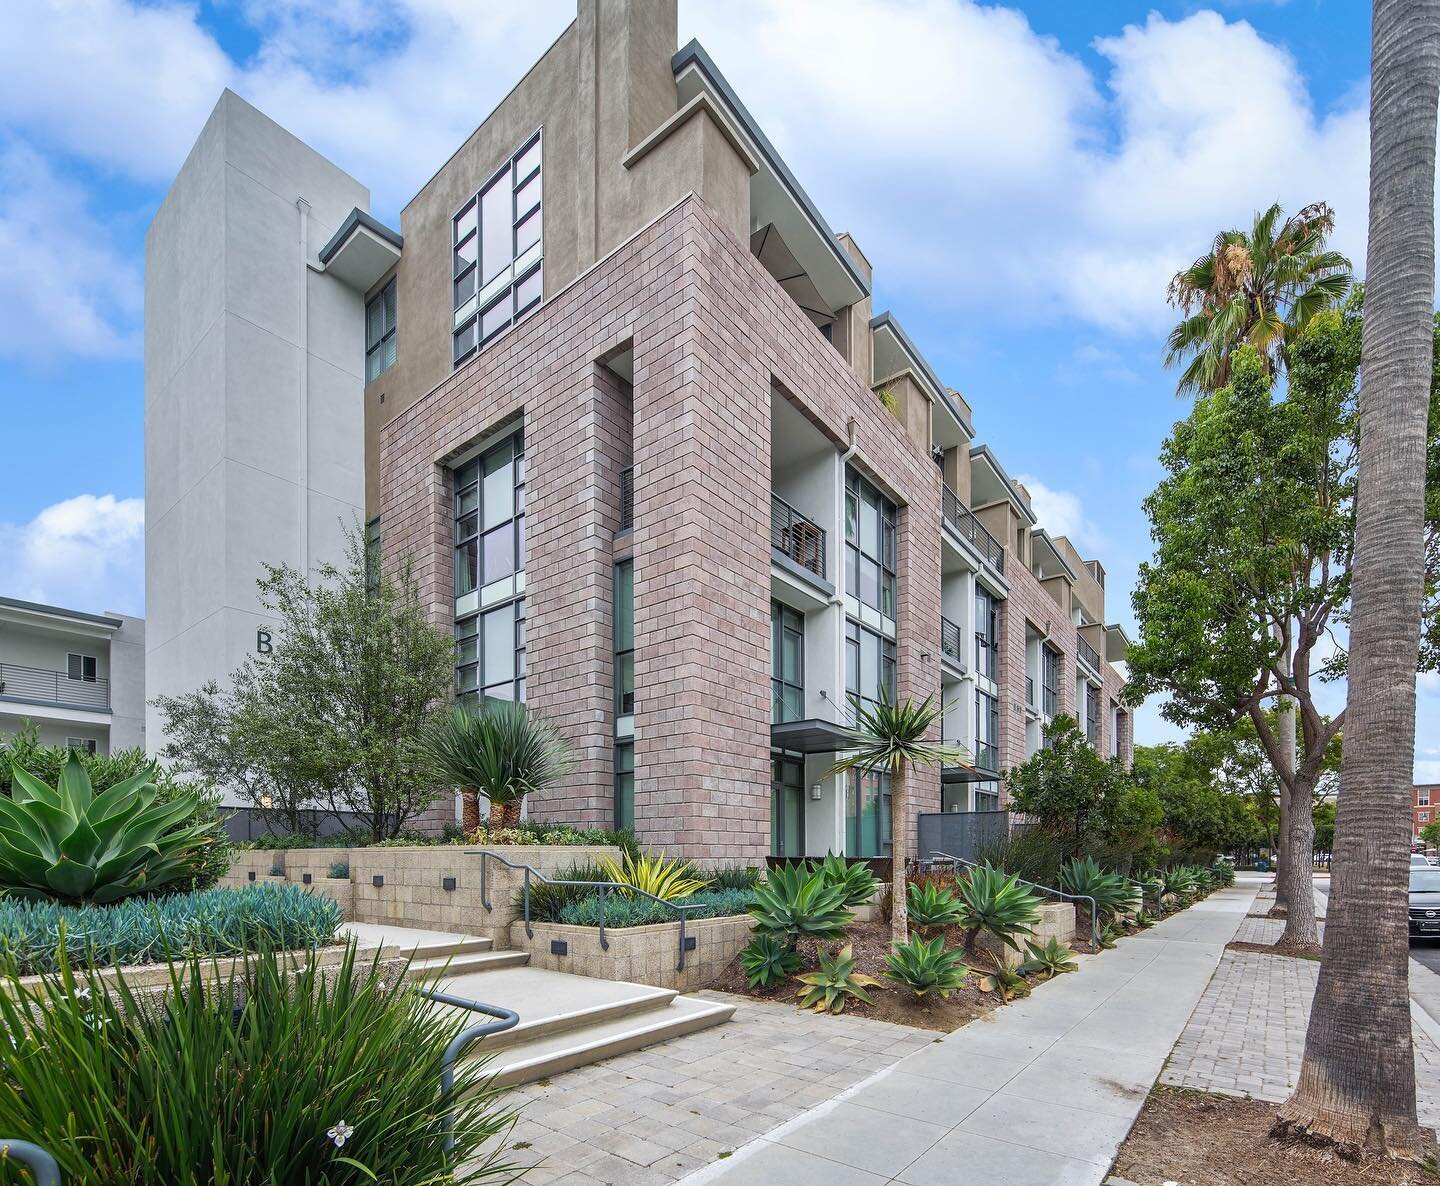 Just Sold Off-Market 🤍 Impressive Loft Townhome in Playa Vista 🤍
Experience the best of Silicon Beach living in this impressive Loft townhouse located in the heart of Playa Vista within the coveted Concerto Lofts.

Moving through a private entrance